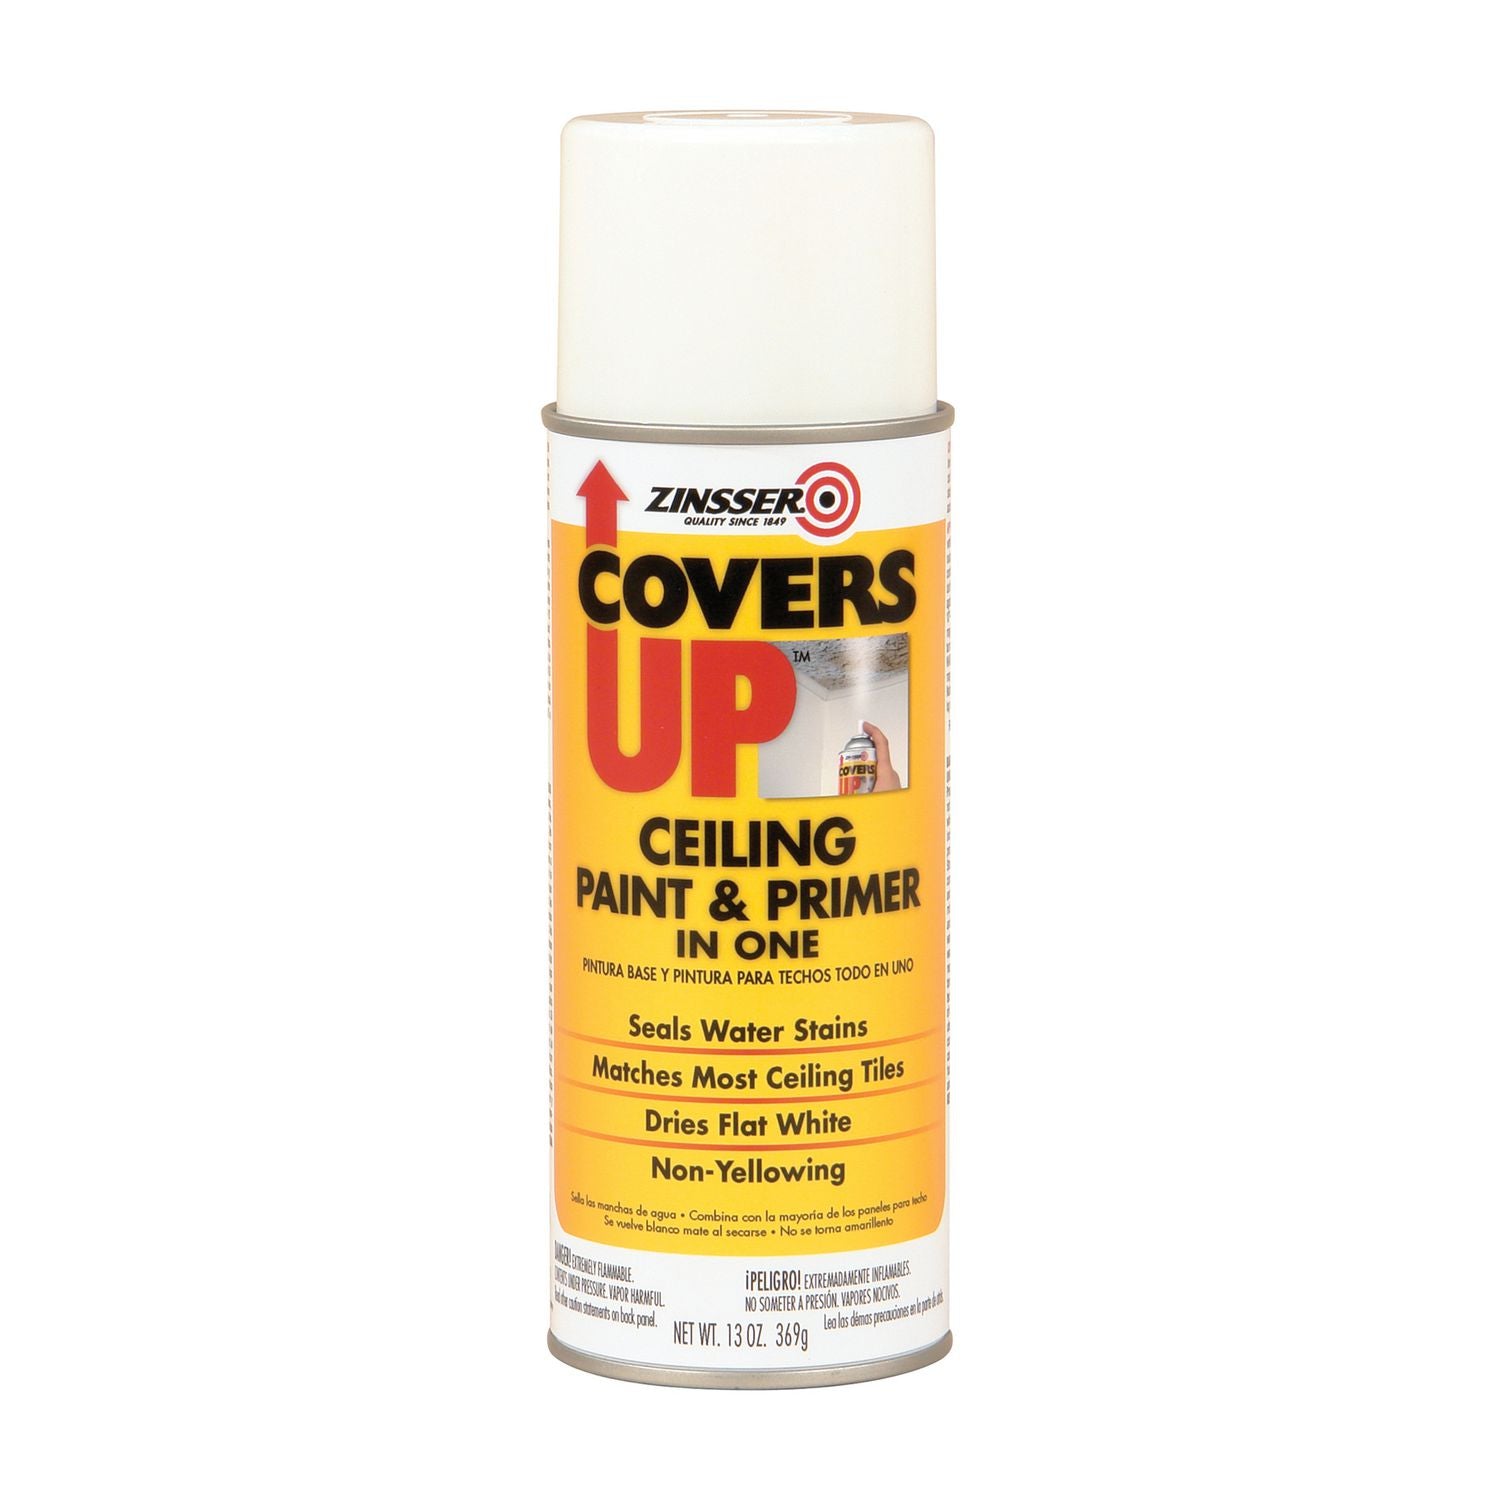 covers-up-ceiling-paint-and-primer-interior-flat-white-13-oz-aerosol-can-6-carton_rst3688ct - 1